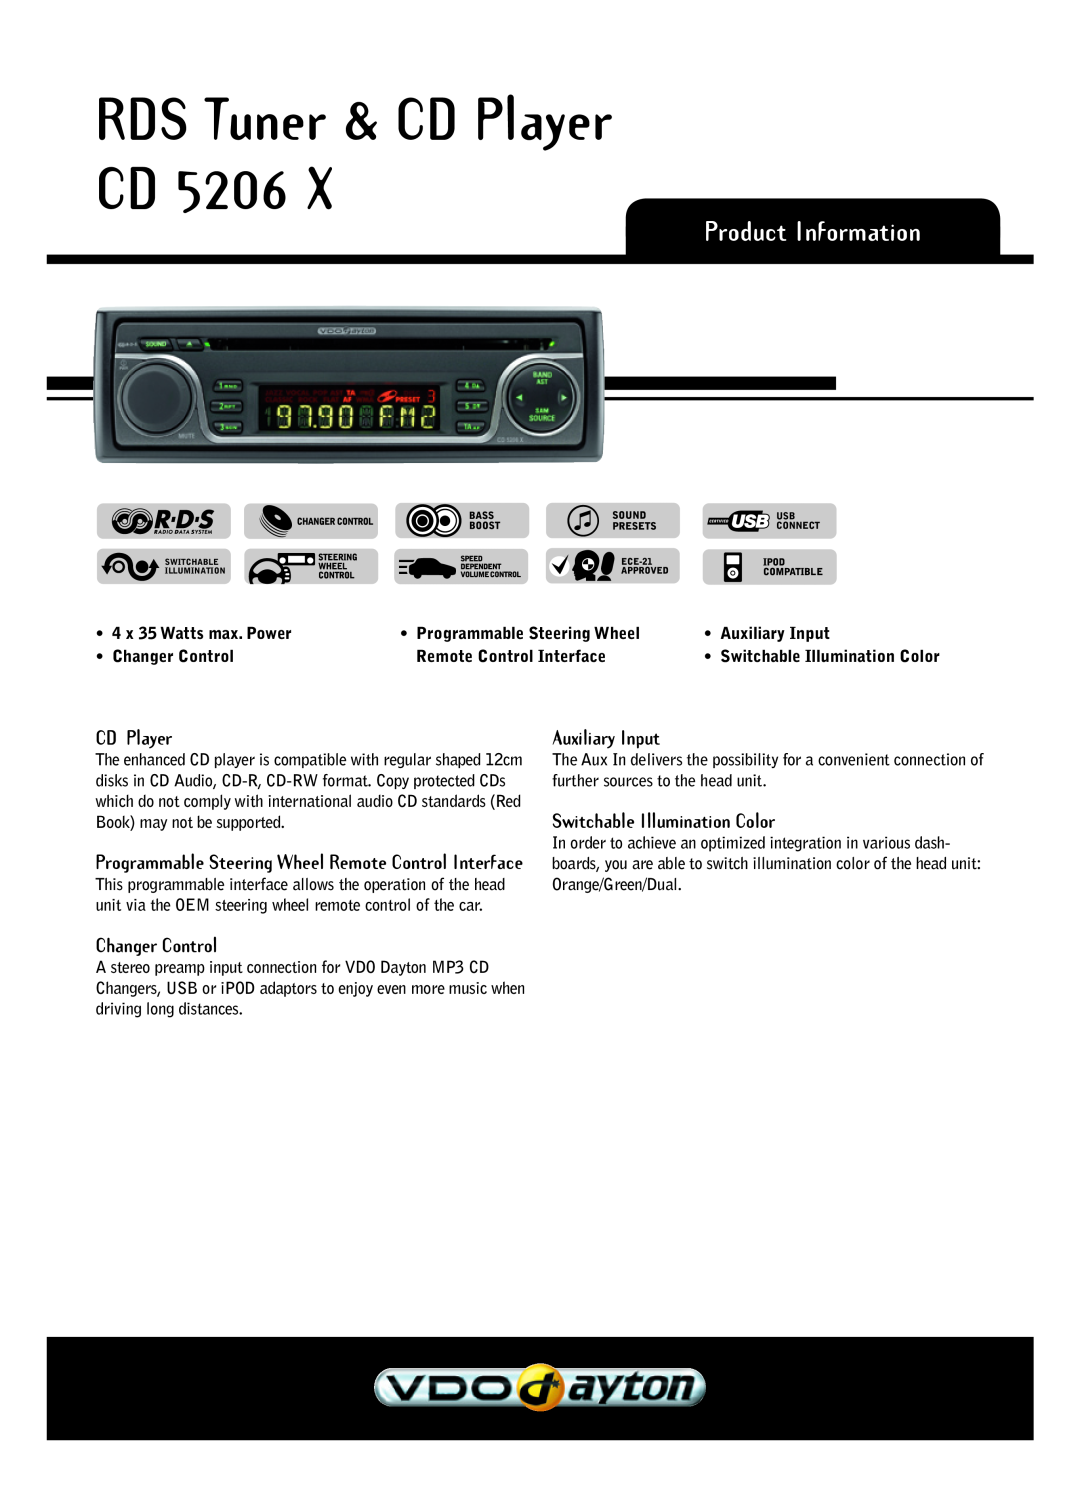 VDO Dayton CD 5206 X manual RDS Tuner & CD Player CD, Product Information, Auxiliary Input, Switchable Illumination Color 